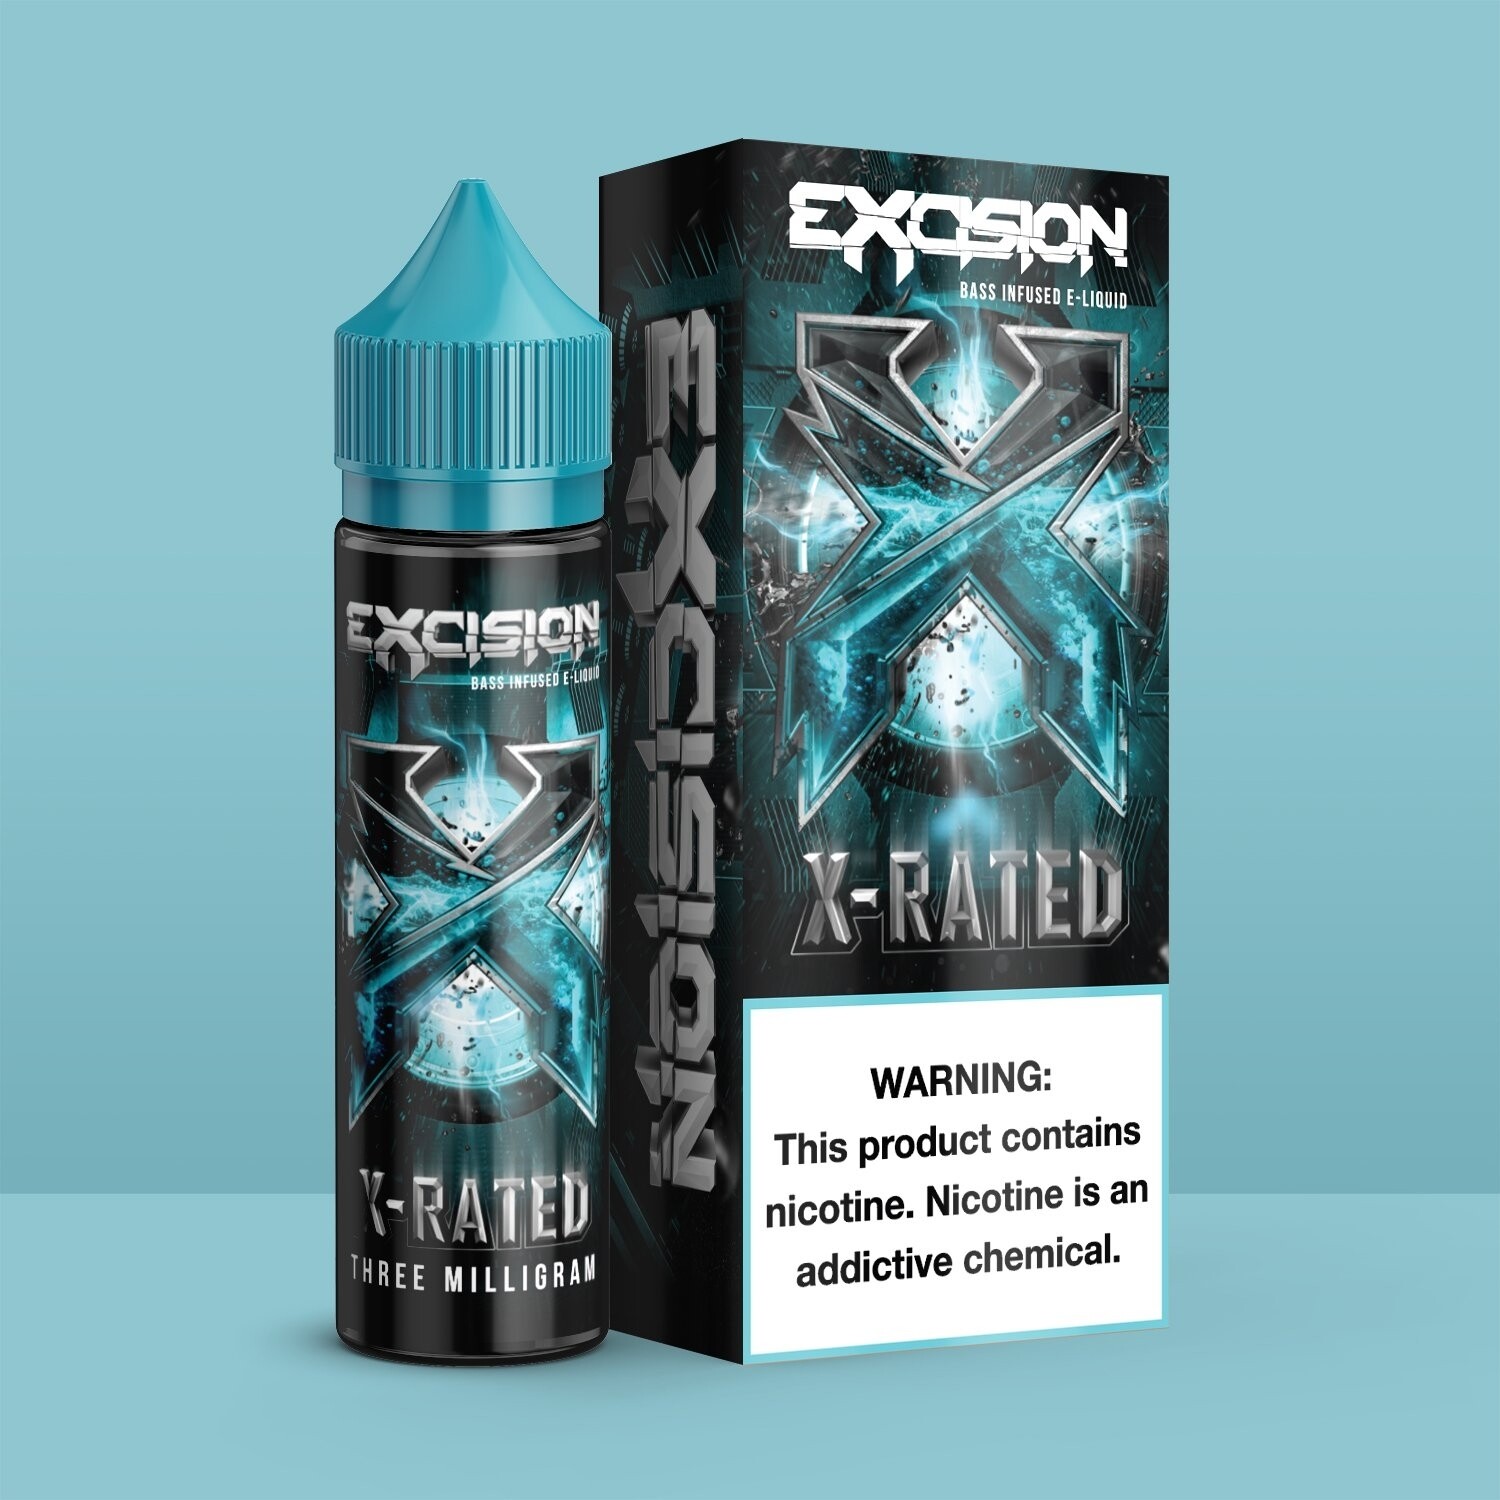 Excision X-Rated 3mg 60ml